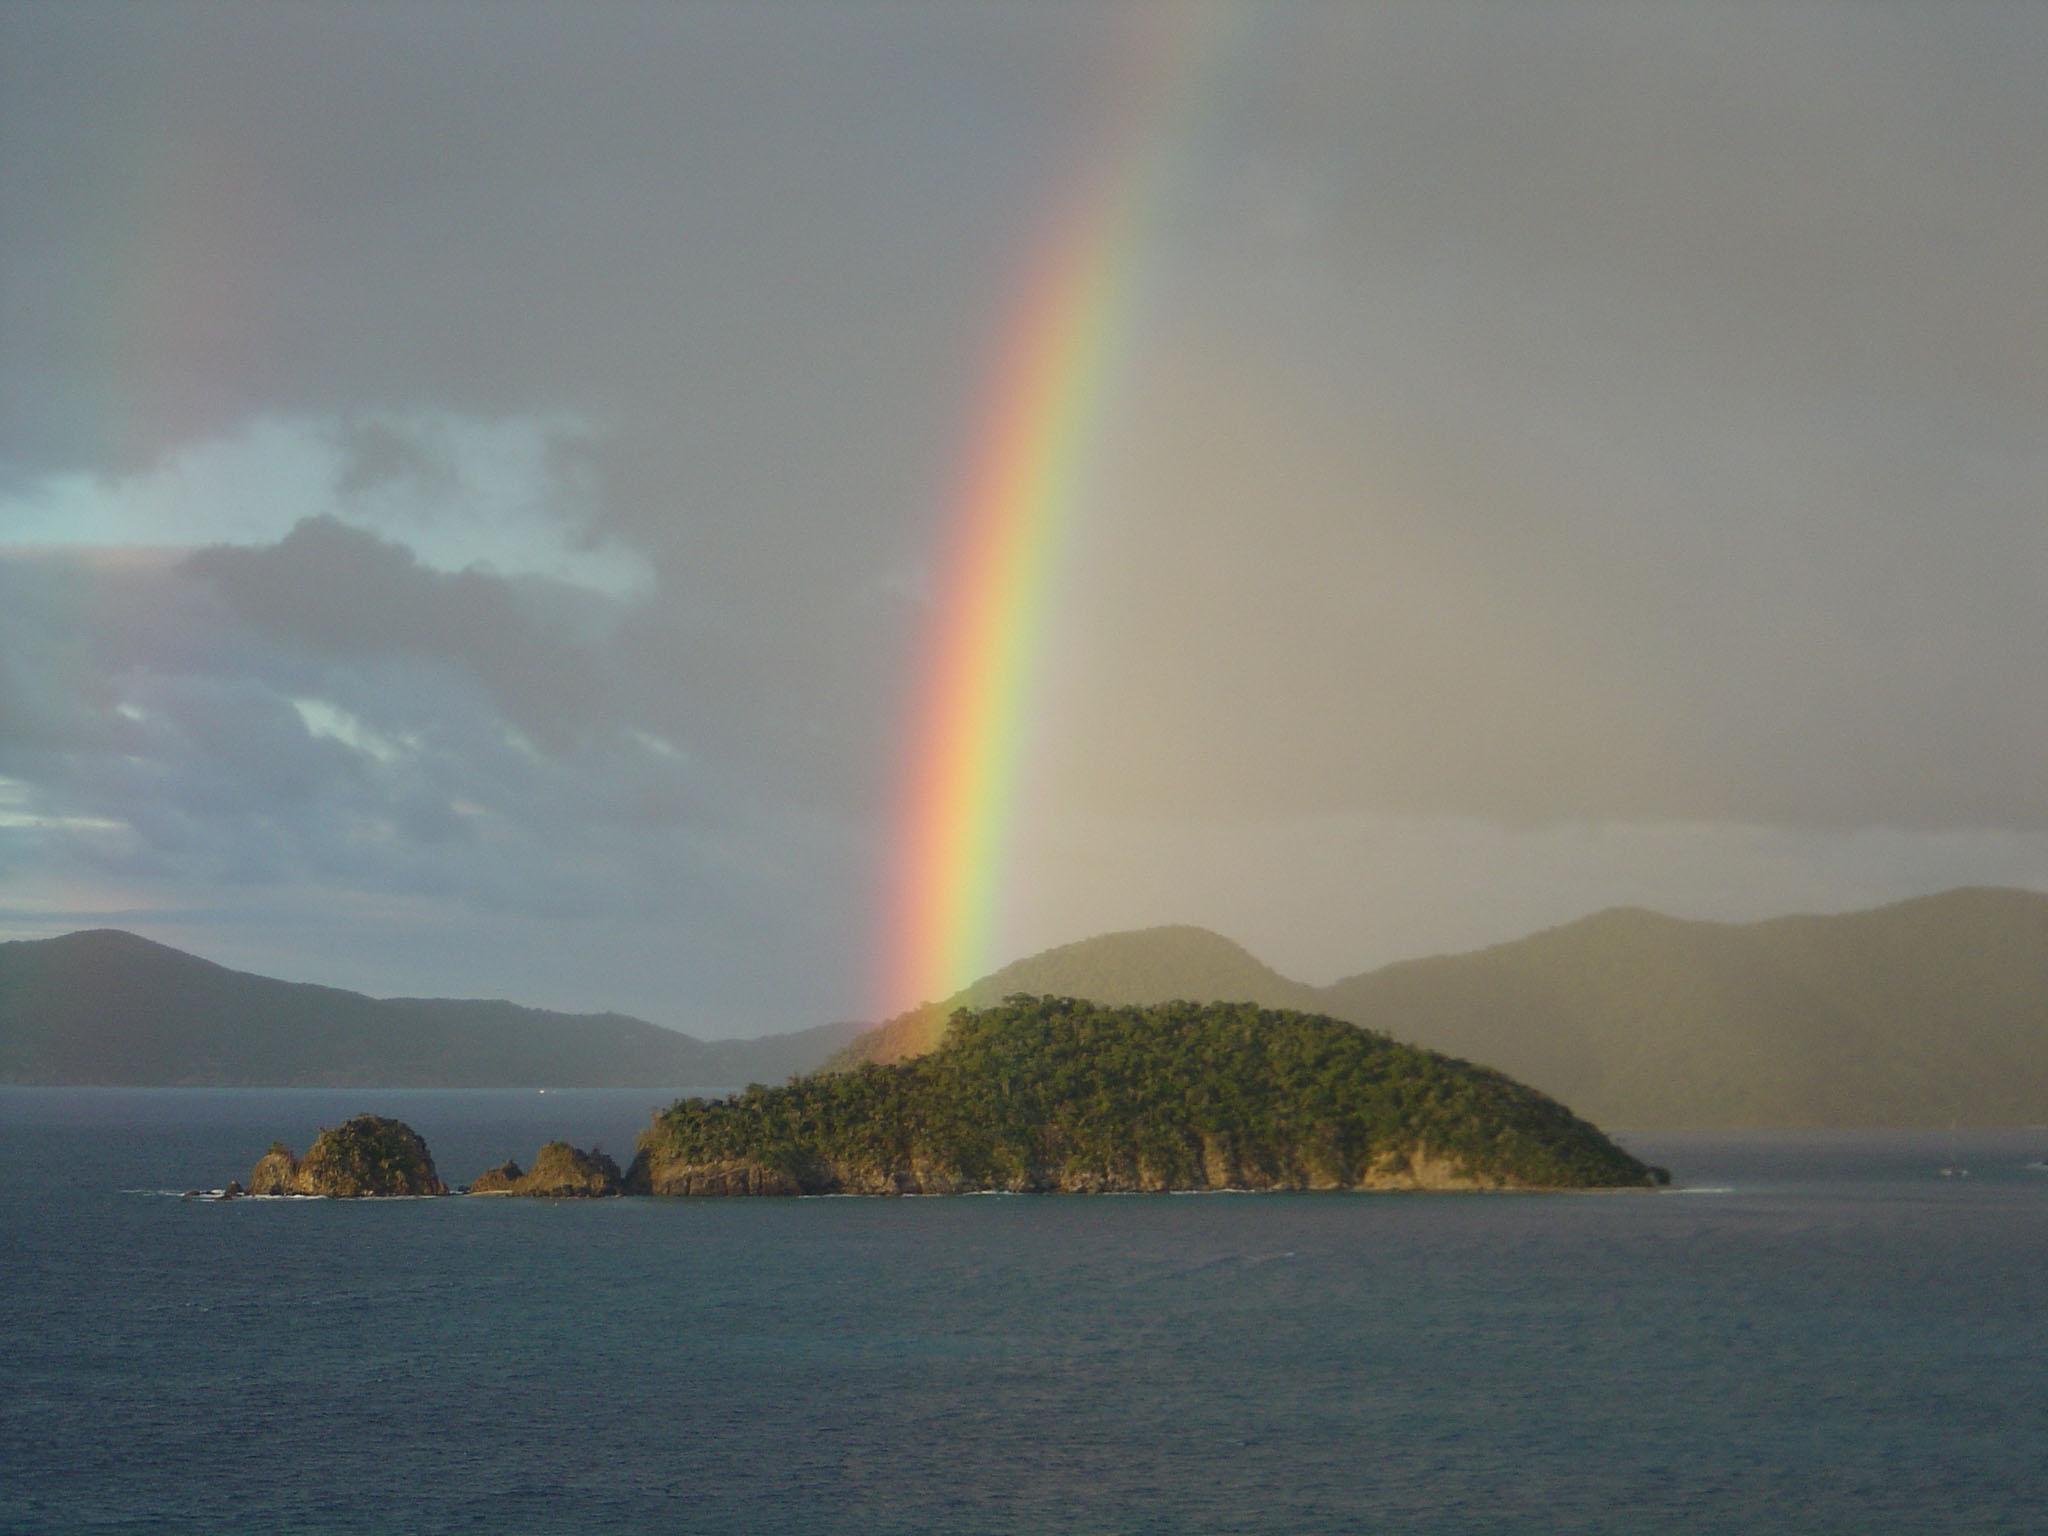 A rainbow stretches out over Whistling Cay, which protrudes from the blue waters of Virgin Islands National Park with its brown rocky coastline and lush green forested slopes.